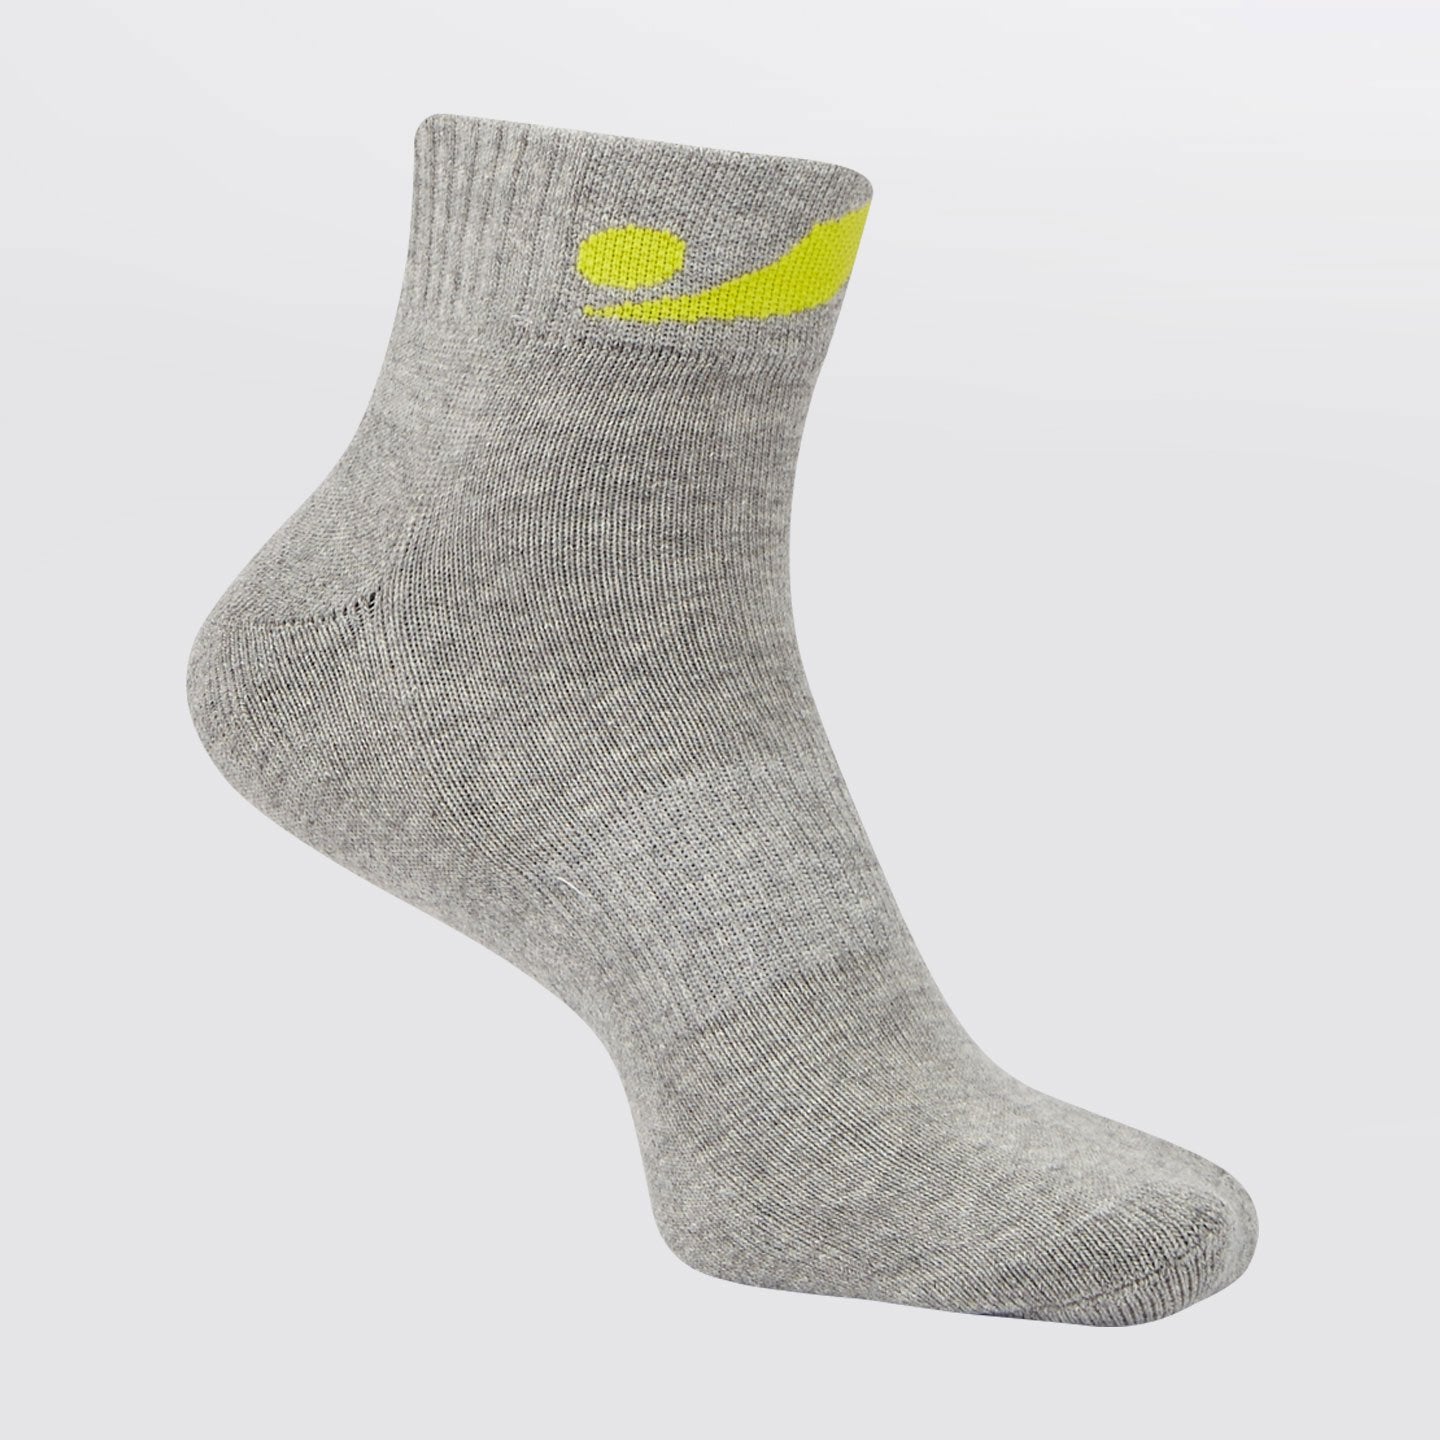 Concave Jogger Sock - Grey/Lime